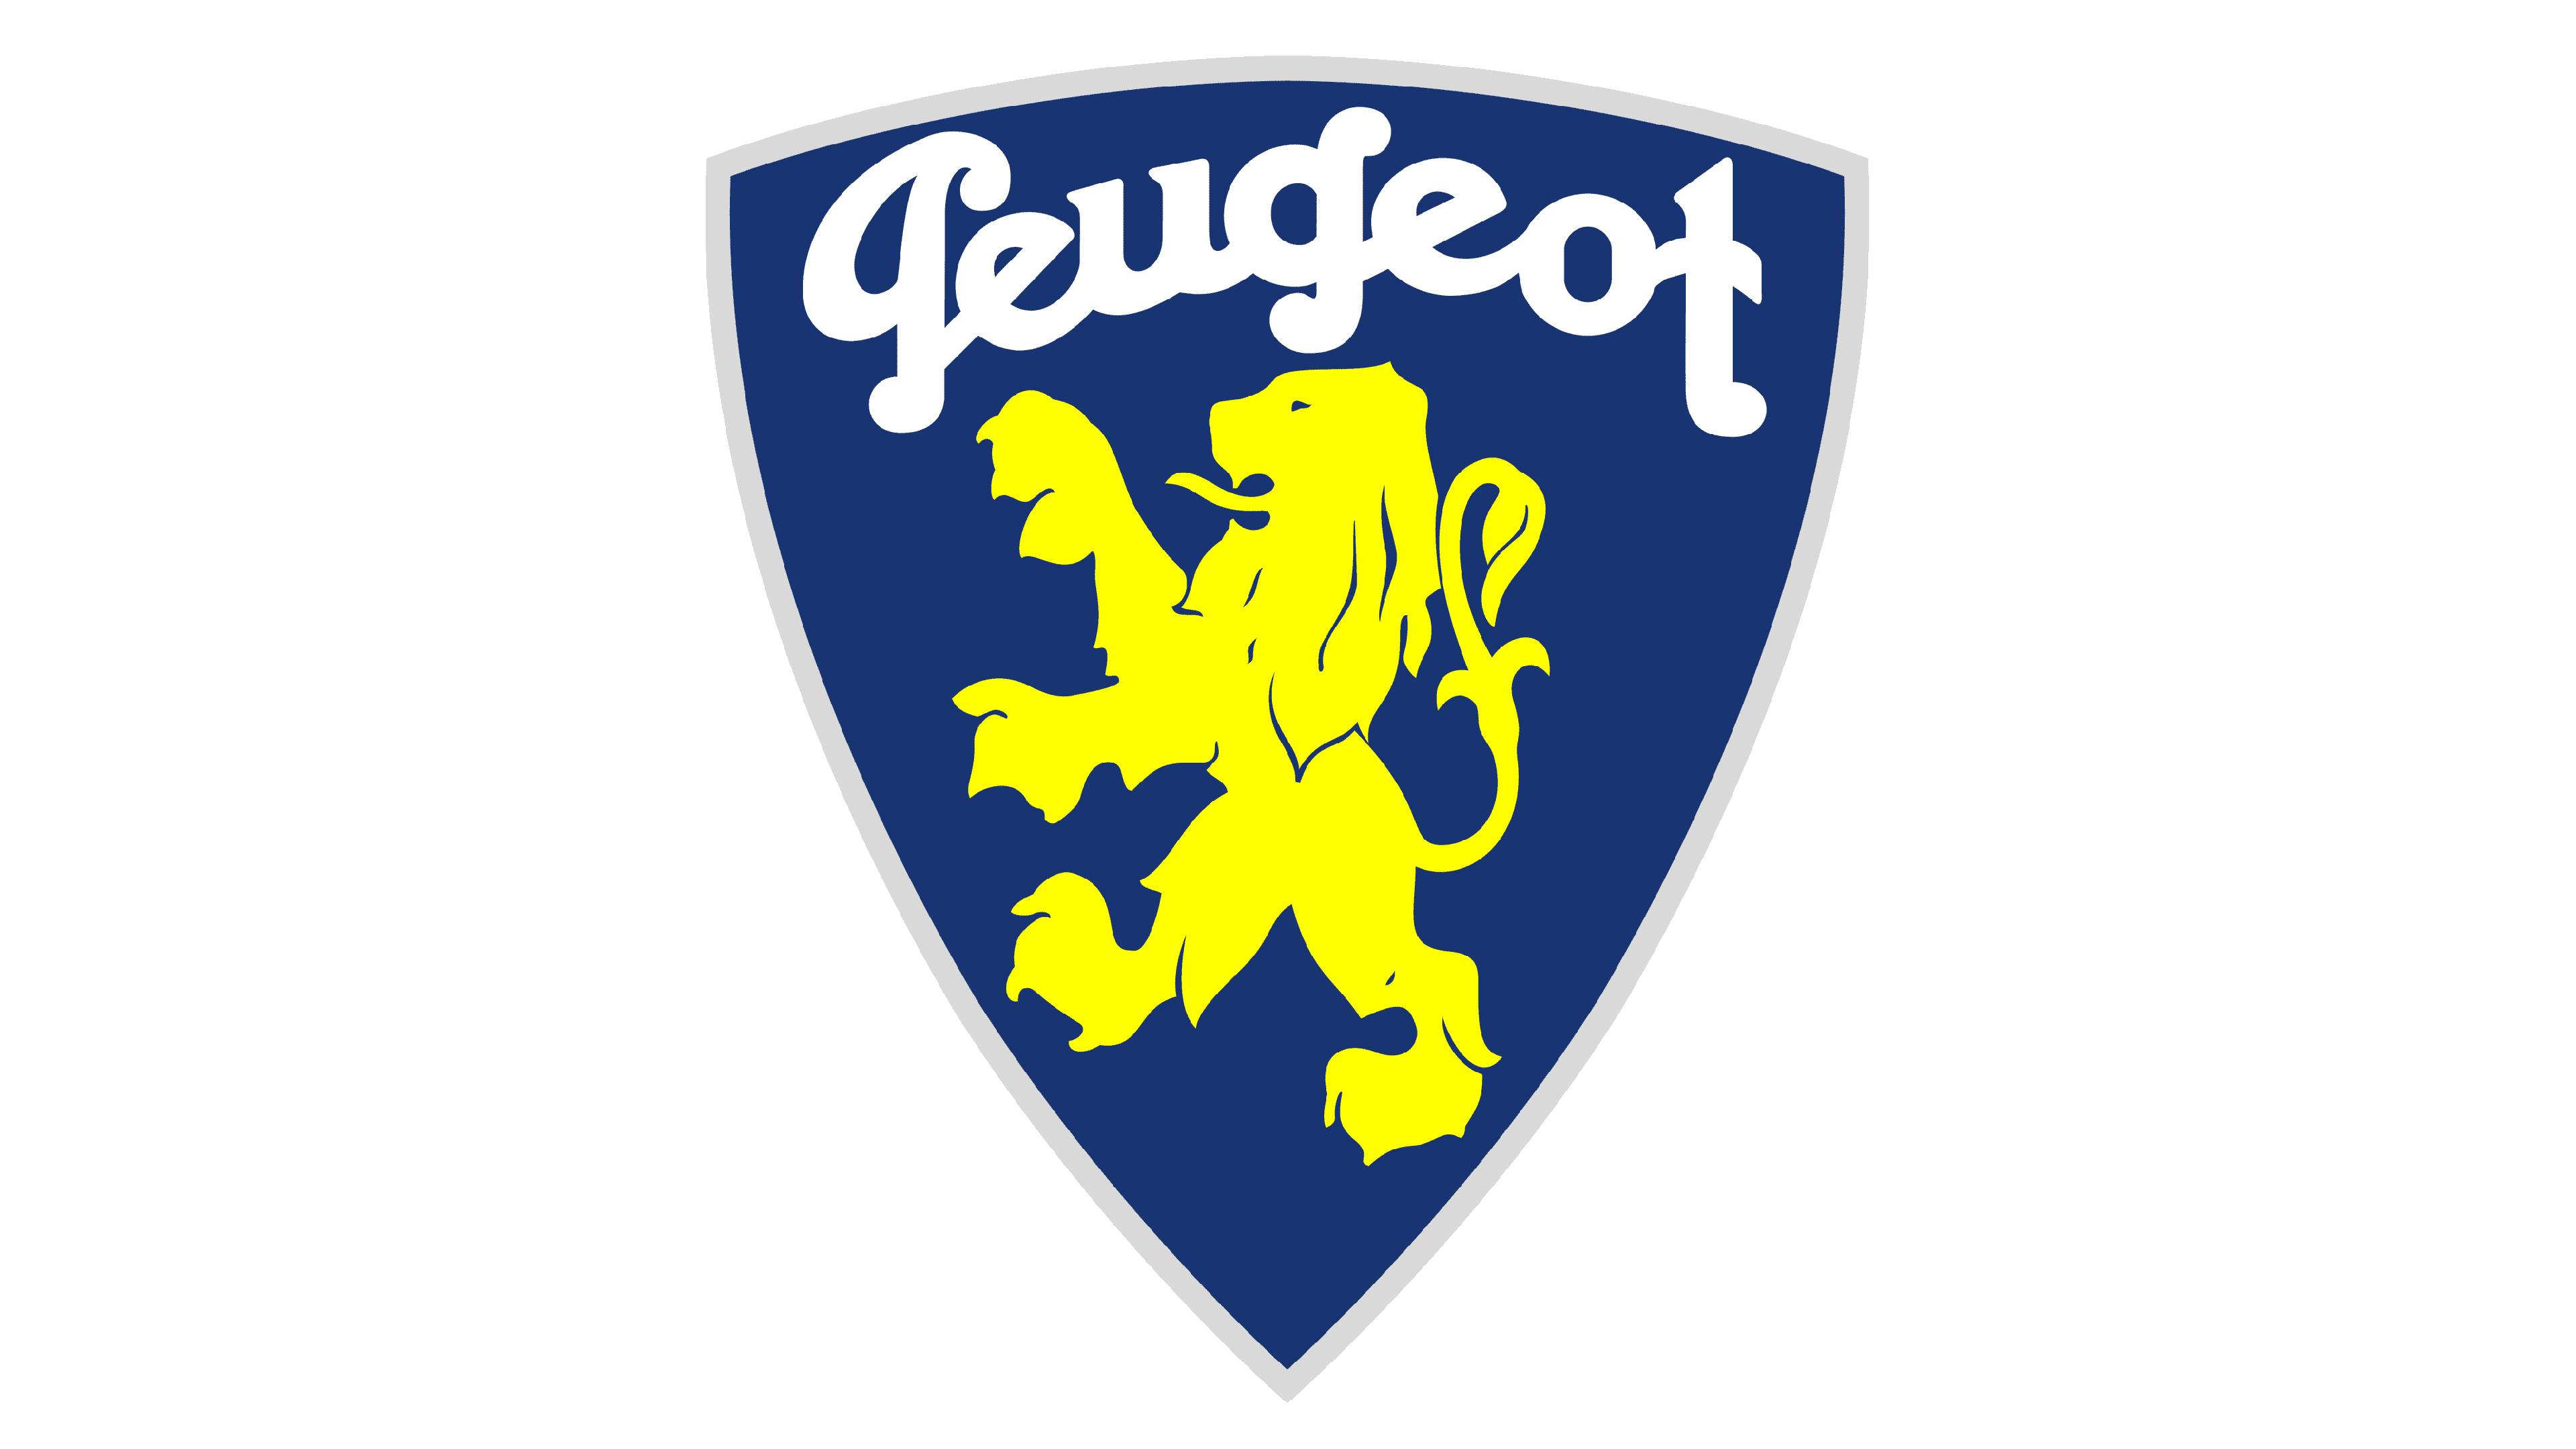 Peugeot removes lion's body from logo for first time in almost 50